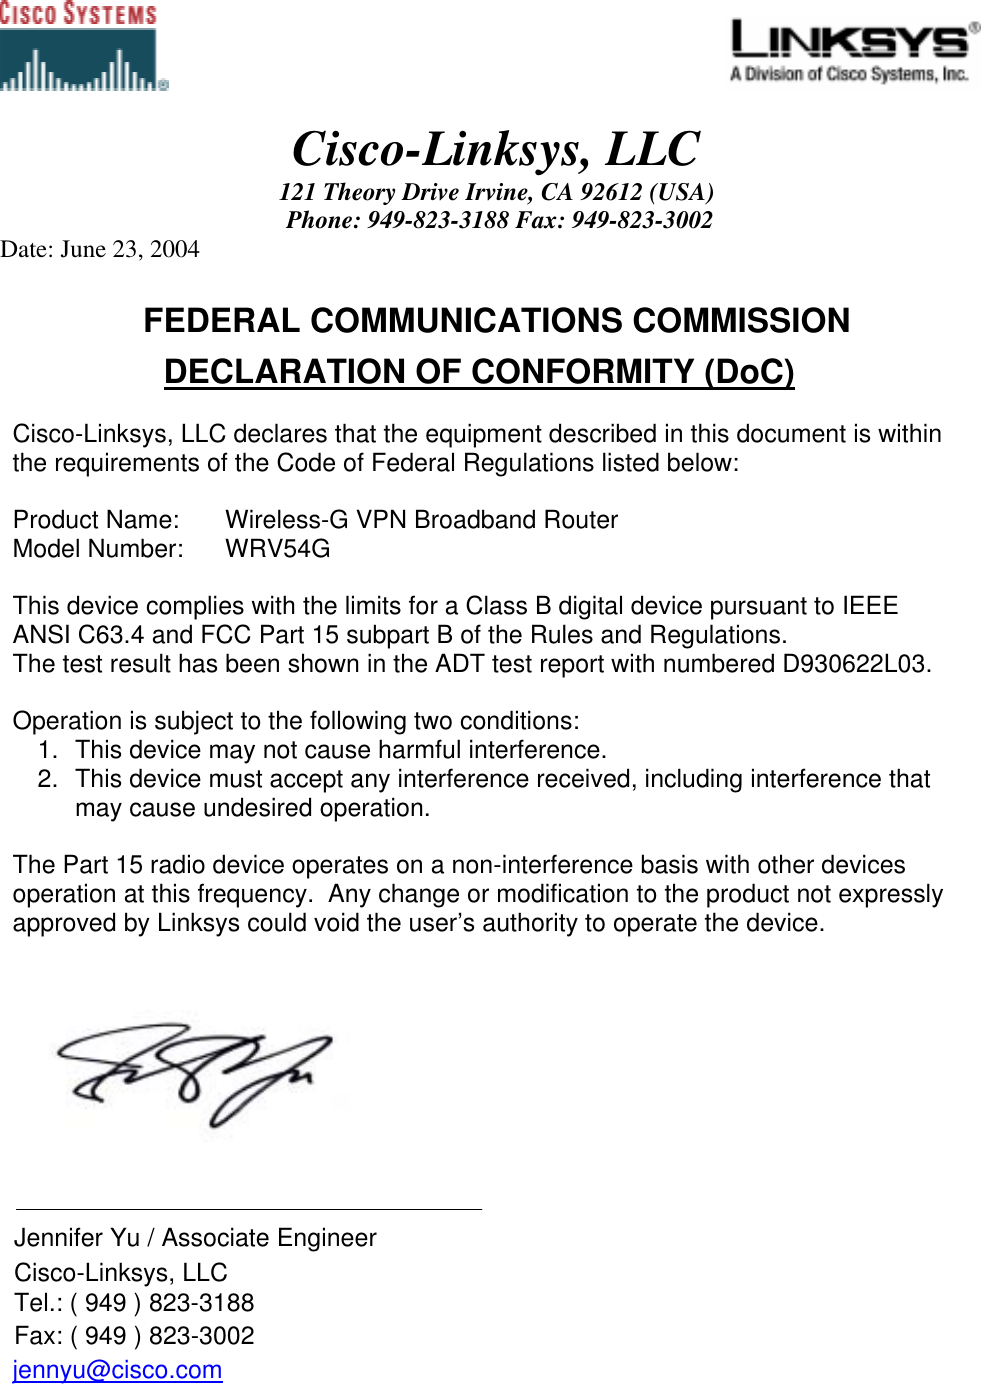                                                                                             Cisco-Linksys, LLC 121 Theory Drive Irvine, CA 92612 (USA)  Phone: 949-823-3188 Fax: 949-823-3002 Date: June 23, 2004   FEDERAL COMMUNICATIONS COMMISSION DECLARATION OF CONFORMITY (DoC)  Cisco-Linksys, LLC declares that the equipment described in this document is within the requirements of the Code of Federal Regulations listed below:  Product Name:   Wireless-G VPN Broadband Router Model Number:   WRV54G  This device complies with the limits for a Class B digital device pursuant to IEEE ANSI C63.4 and FCC Part 15 subpart B of the Rules and Regulations.  The test result has been shown in the ADT test report with numbered D930622L03.   Operation is subject to the following two conditions: 1.  This device may not cause harmful interference. 2.  This device must accept any interference received, including interference that may cause undesired operation.   The Part 15 radio device operates on a non-interference basis with other devices operation at this frequency.  Any change or modification to the product not expressly approved by Linksys could void the user’s authority to operate the device.        Jennifer Yu / Associate Engineer    Cisco-Linksys, LLC   Tel.: ( 949 ) 823-3188   Fax: ( 949 ) 823-3002 jennyu@cisco.com     